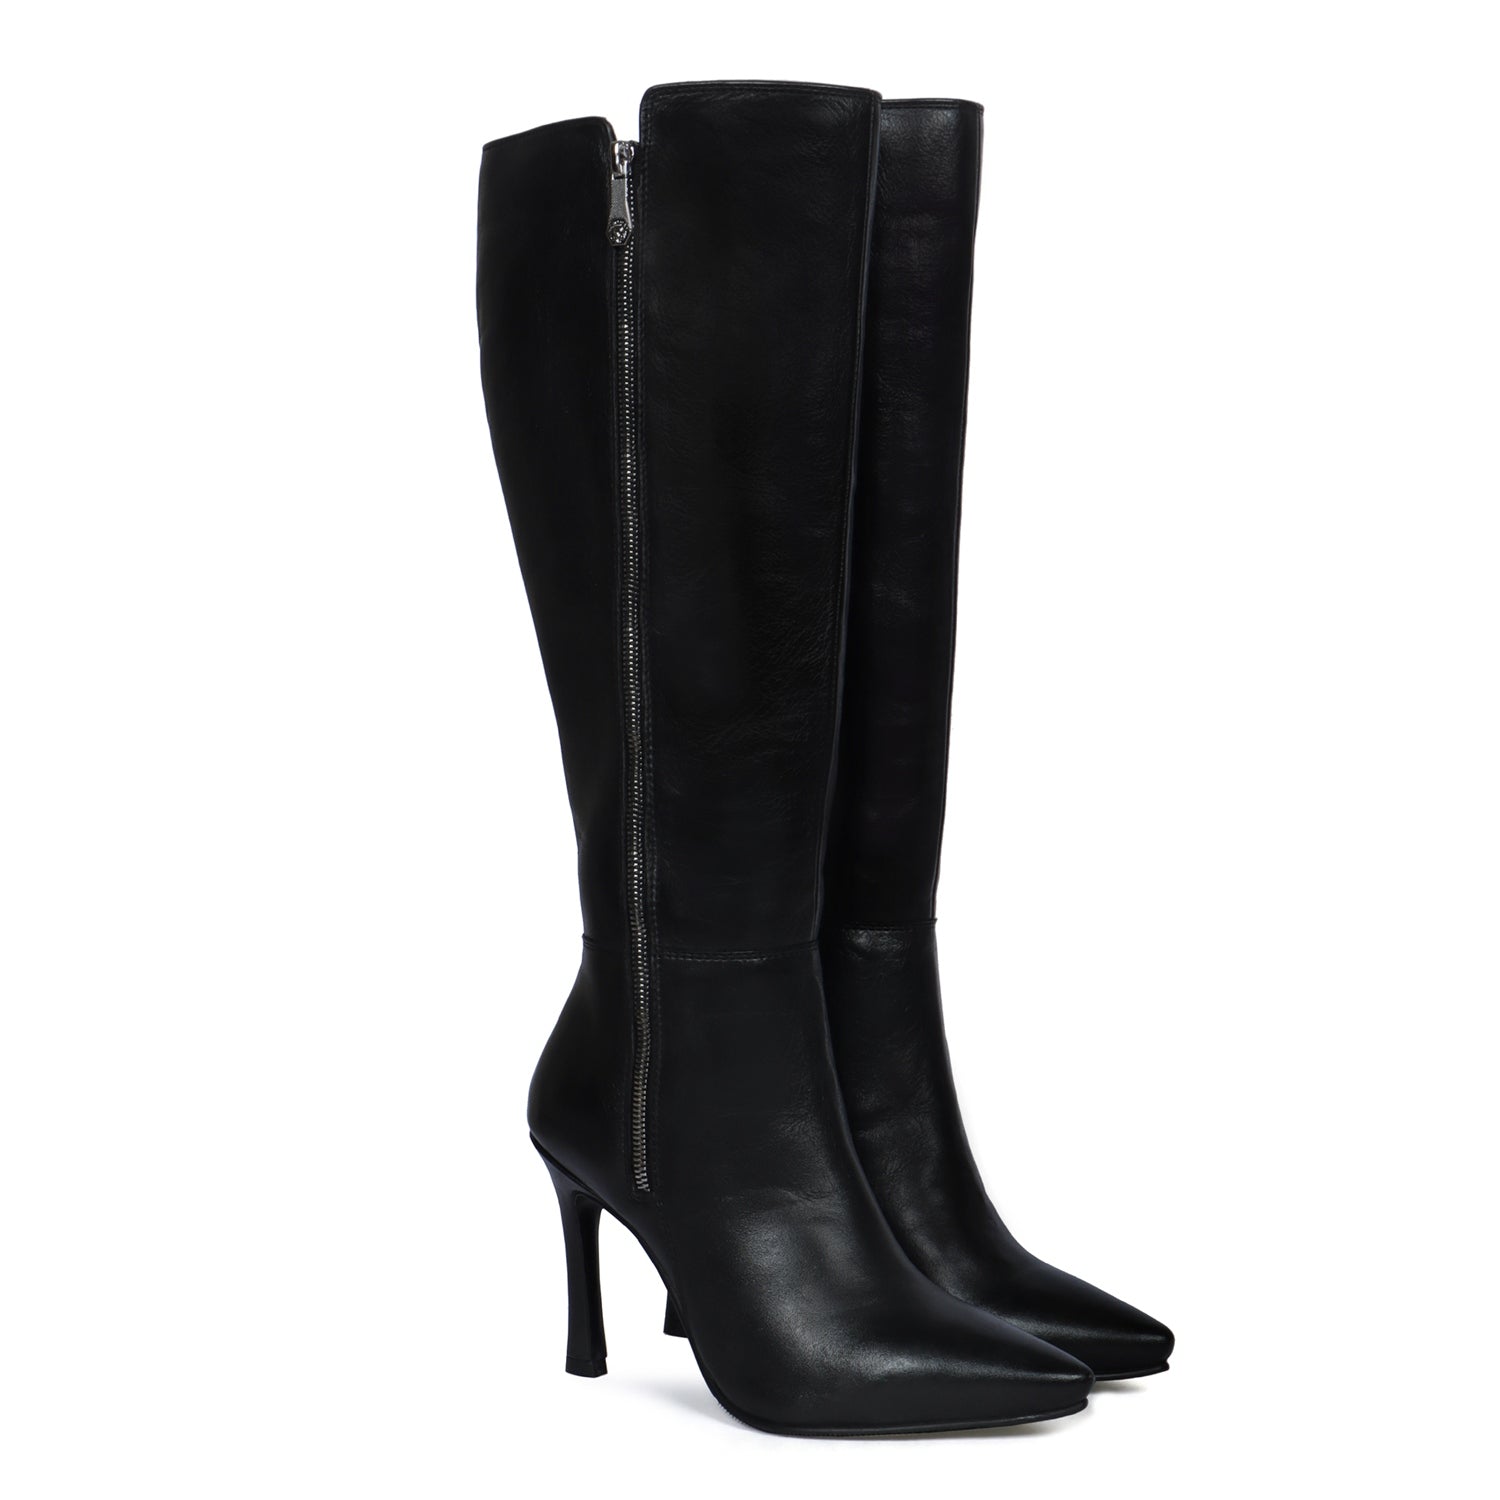 Voganow | Buy Leather boots for women online | Winter Boots